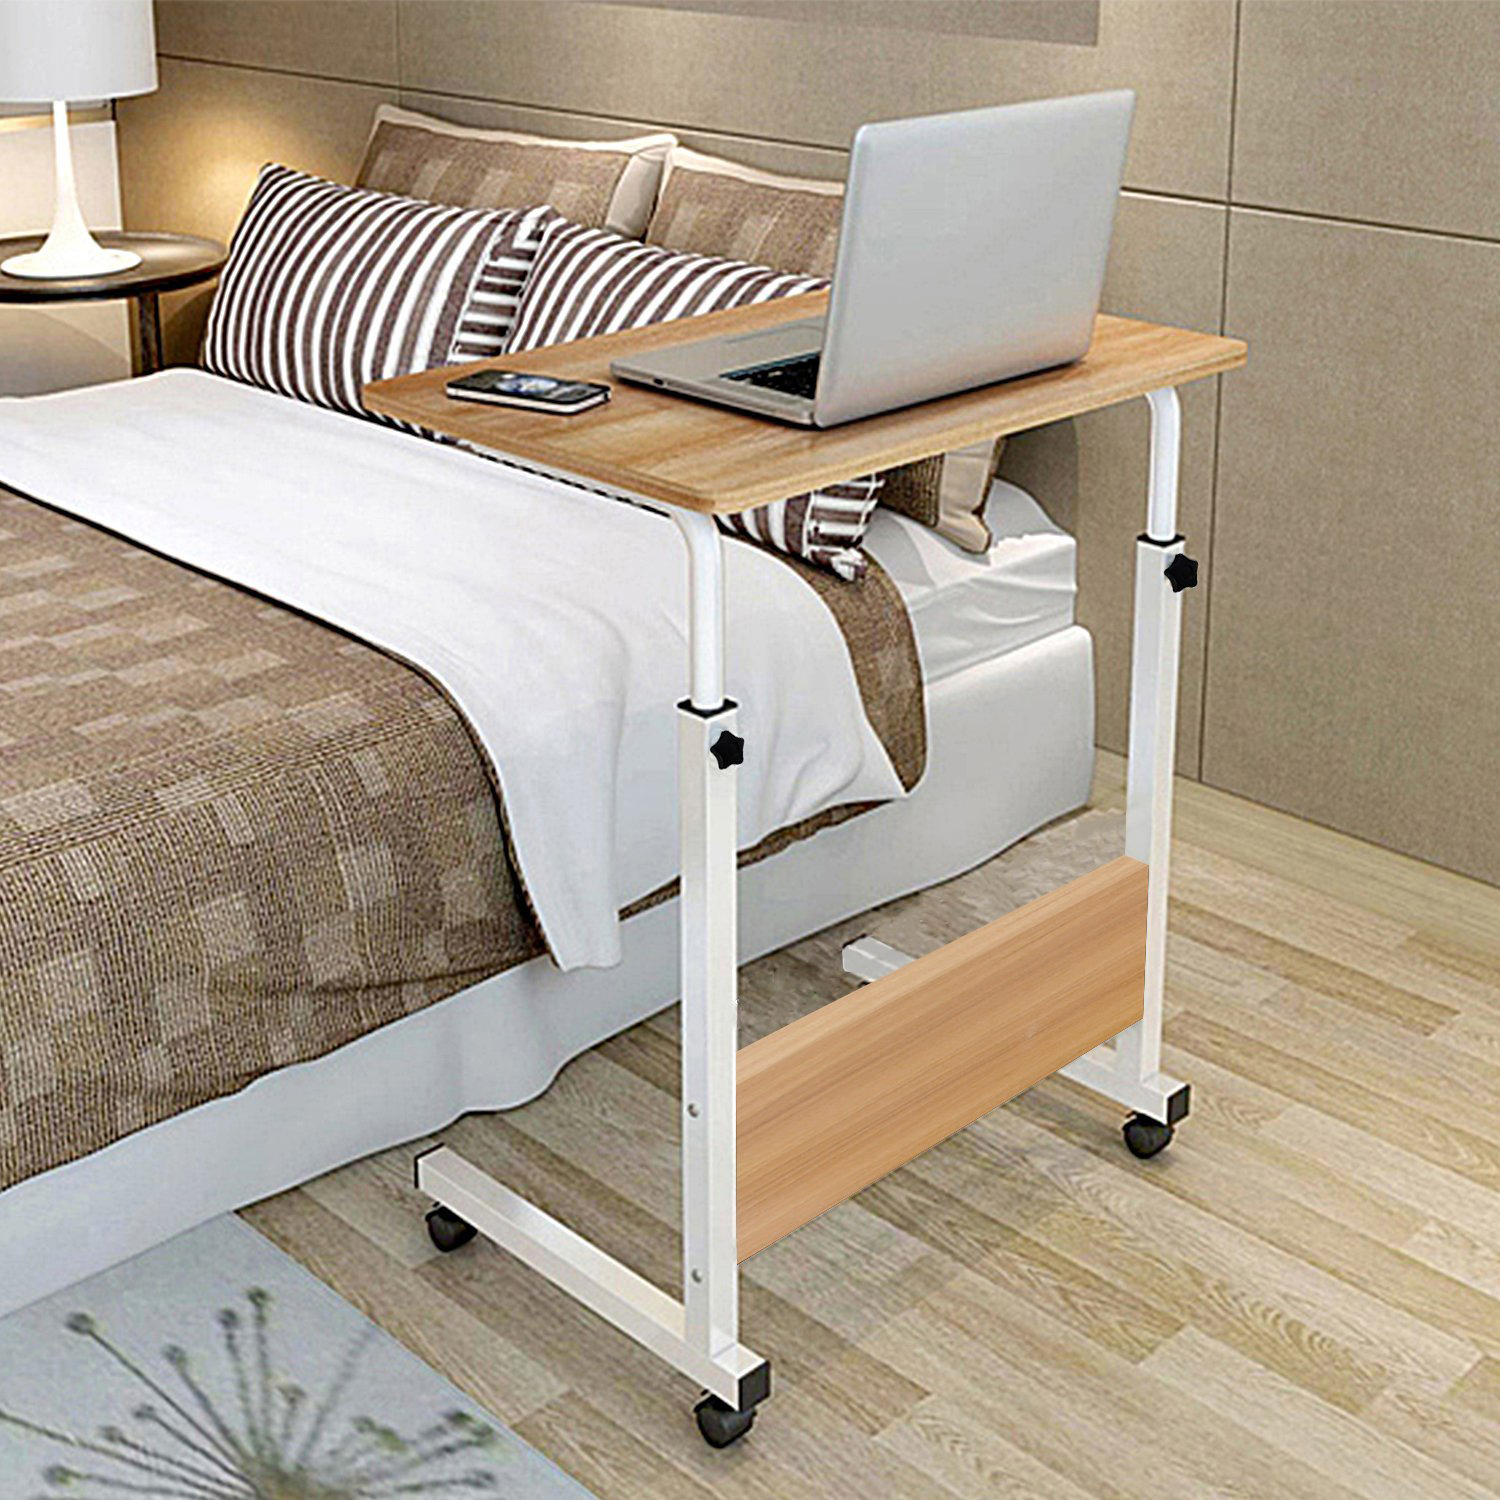 Ktaxon Side Table Adjustable Movable w/Wheels Portable Laptop Stand for Bed Sofa - image 6 of 7